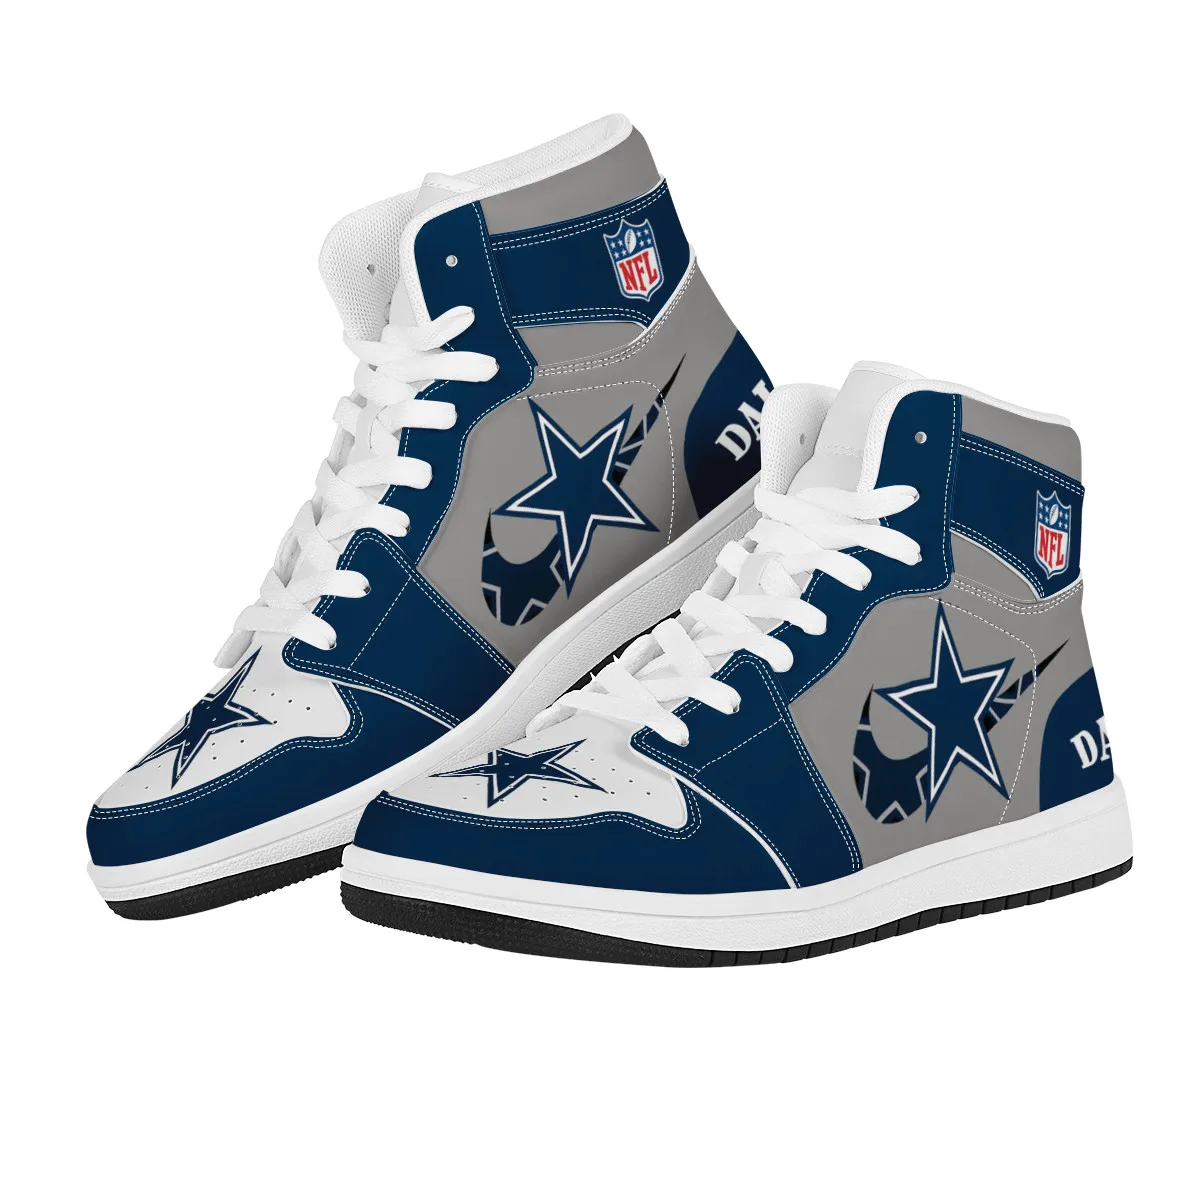 Wholesale Top Quality Trademark Cowboys American Football Teams Classic  Super Basketball Running Sport Luxury Shoes Men From m.